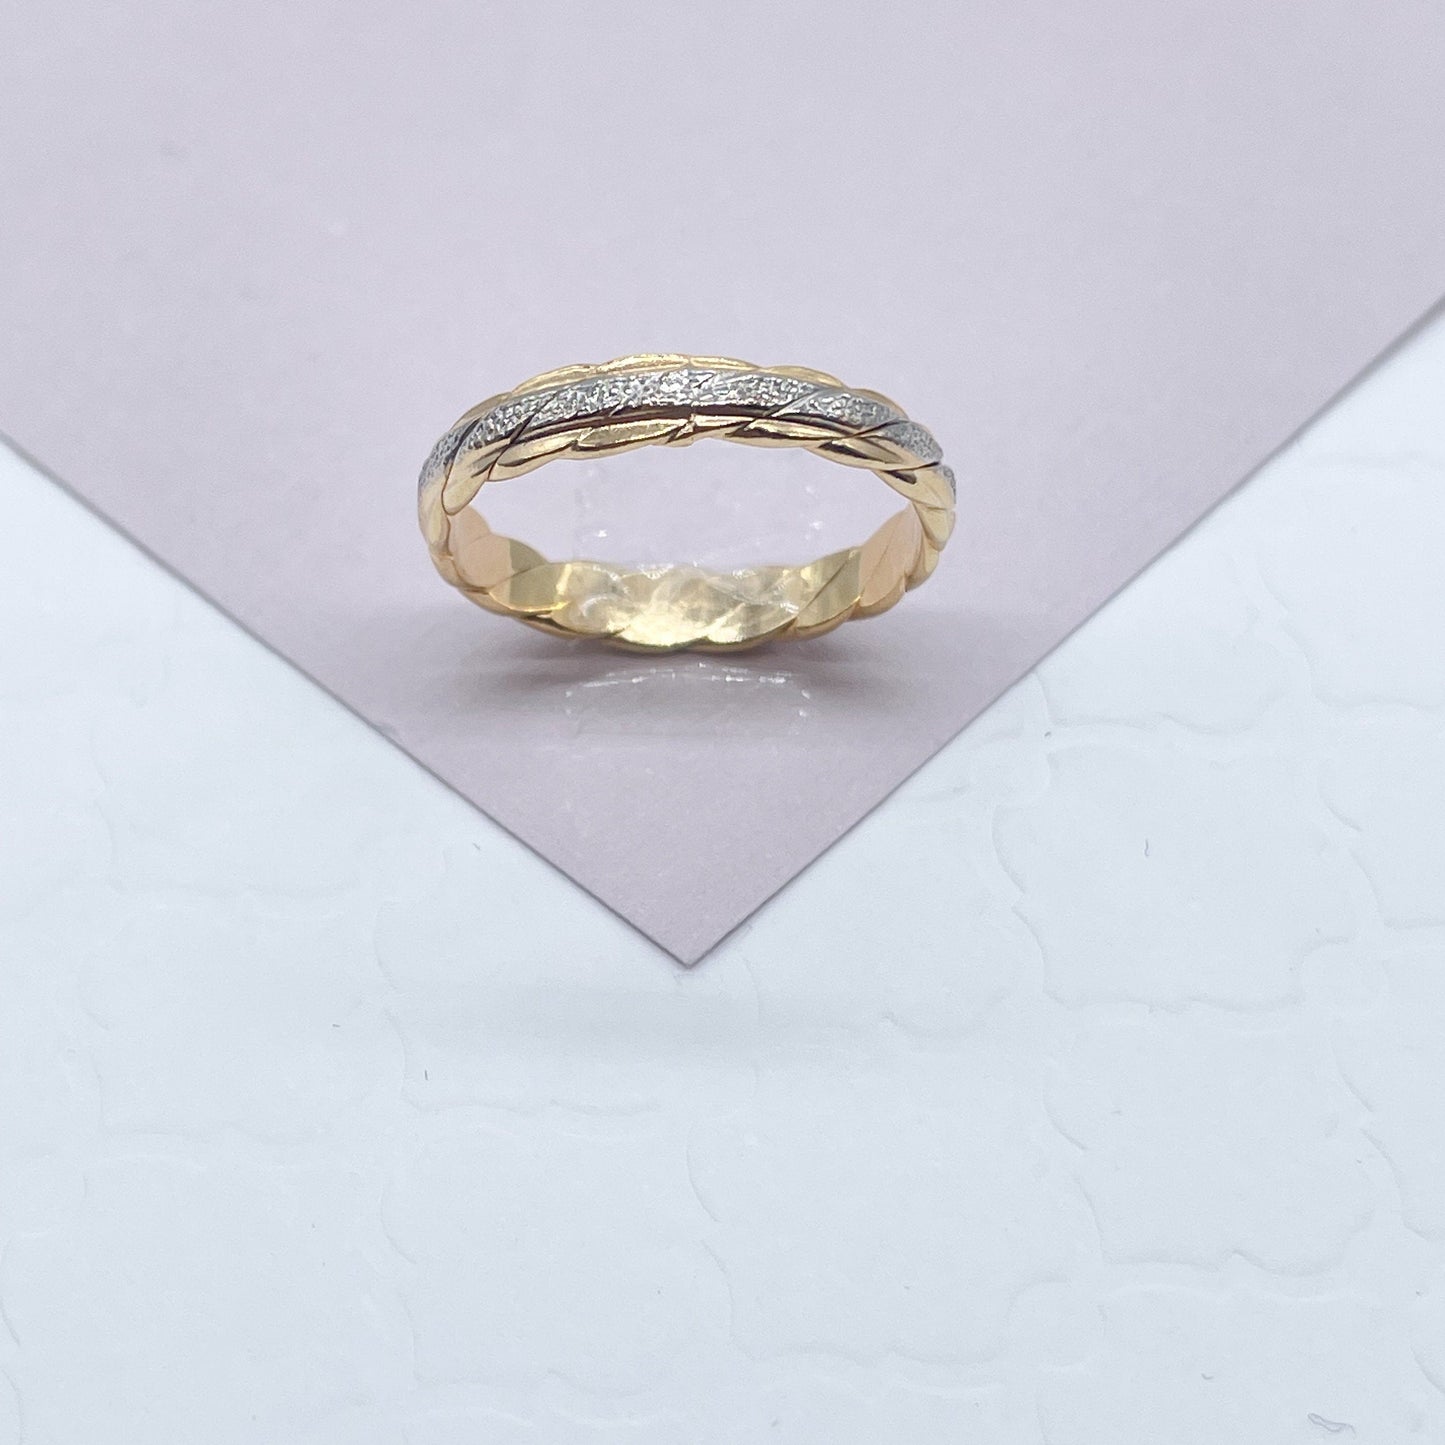 18k Gold Layered Twisted Details Ring Featuring A Line of Silver On Top Of The